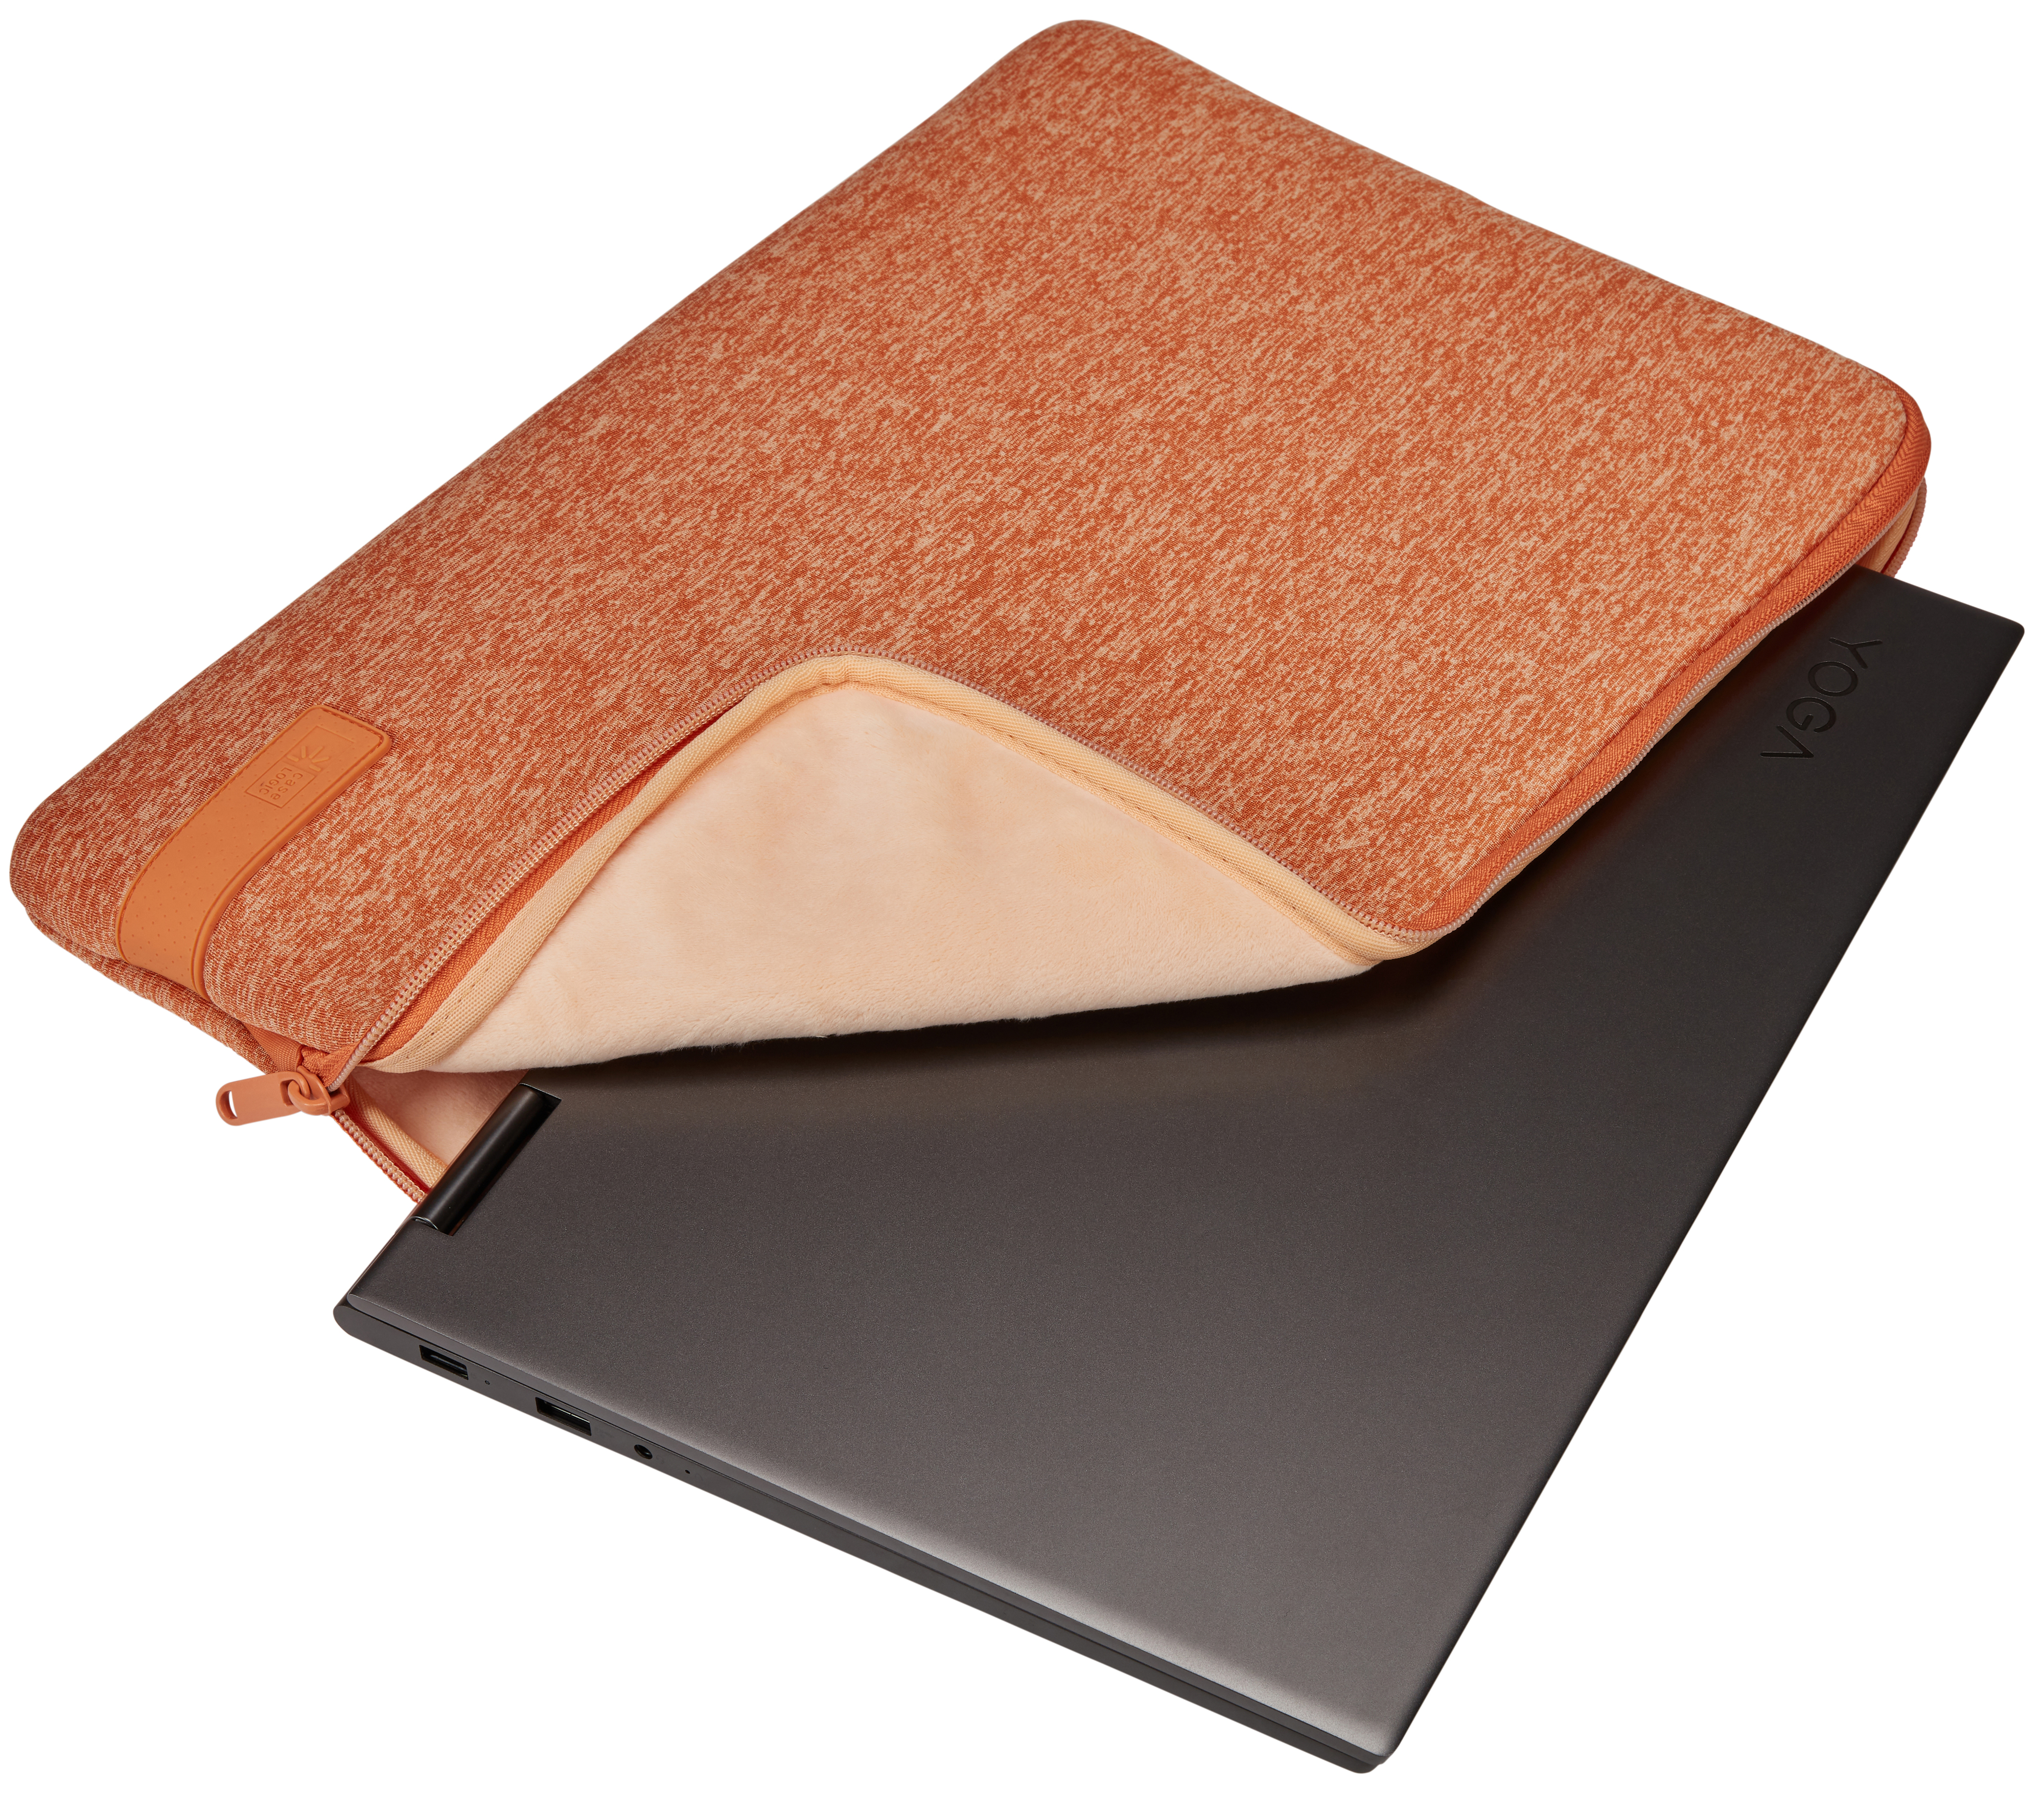 LOGIC Gold/Apricot für CASE Sleeve Polyester, Notebook Universal Sleeve Coral Reflect